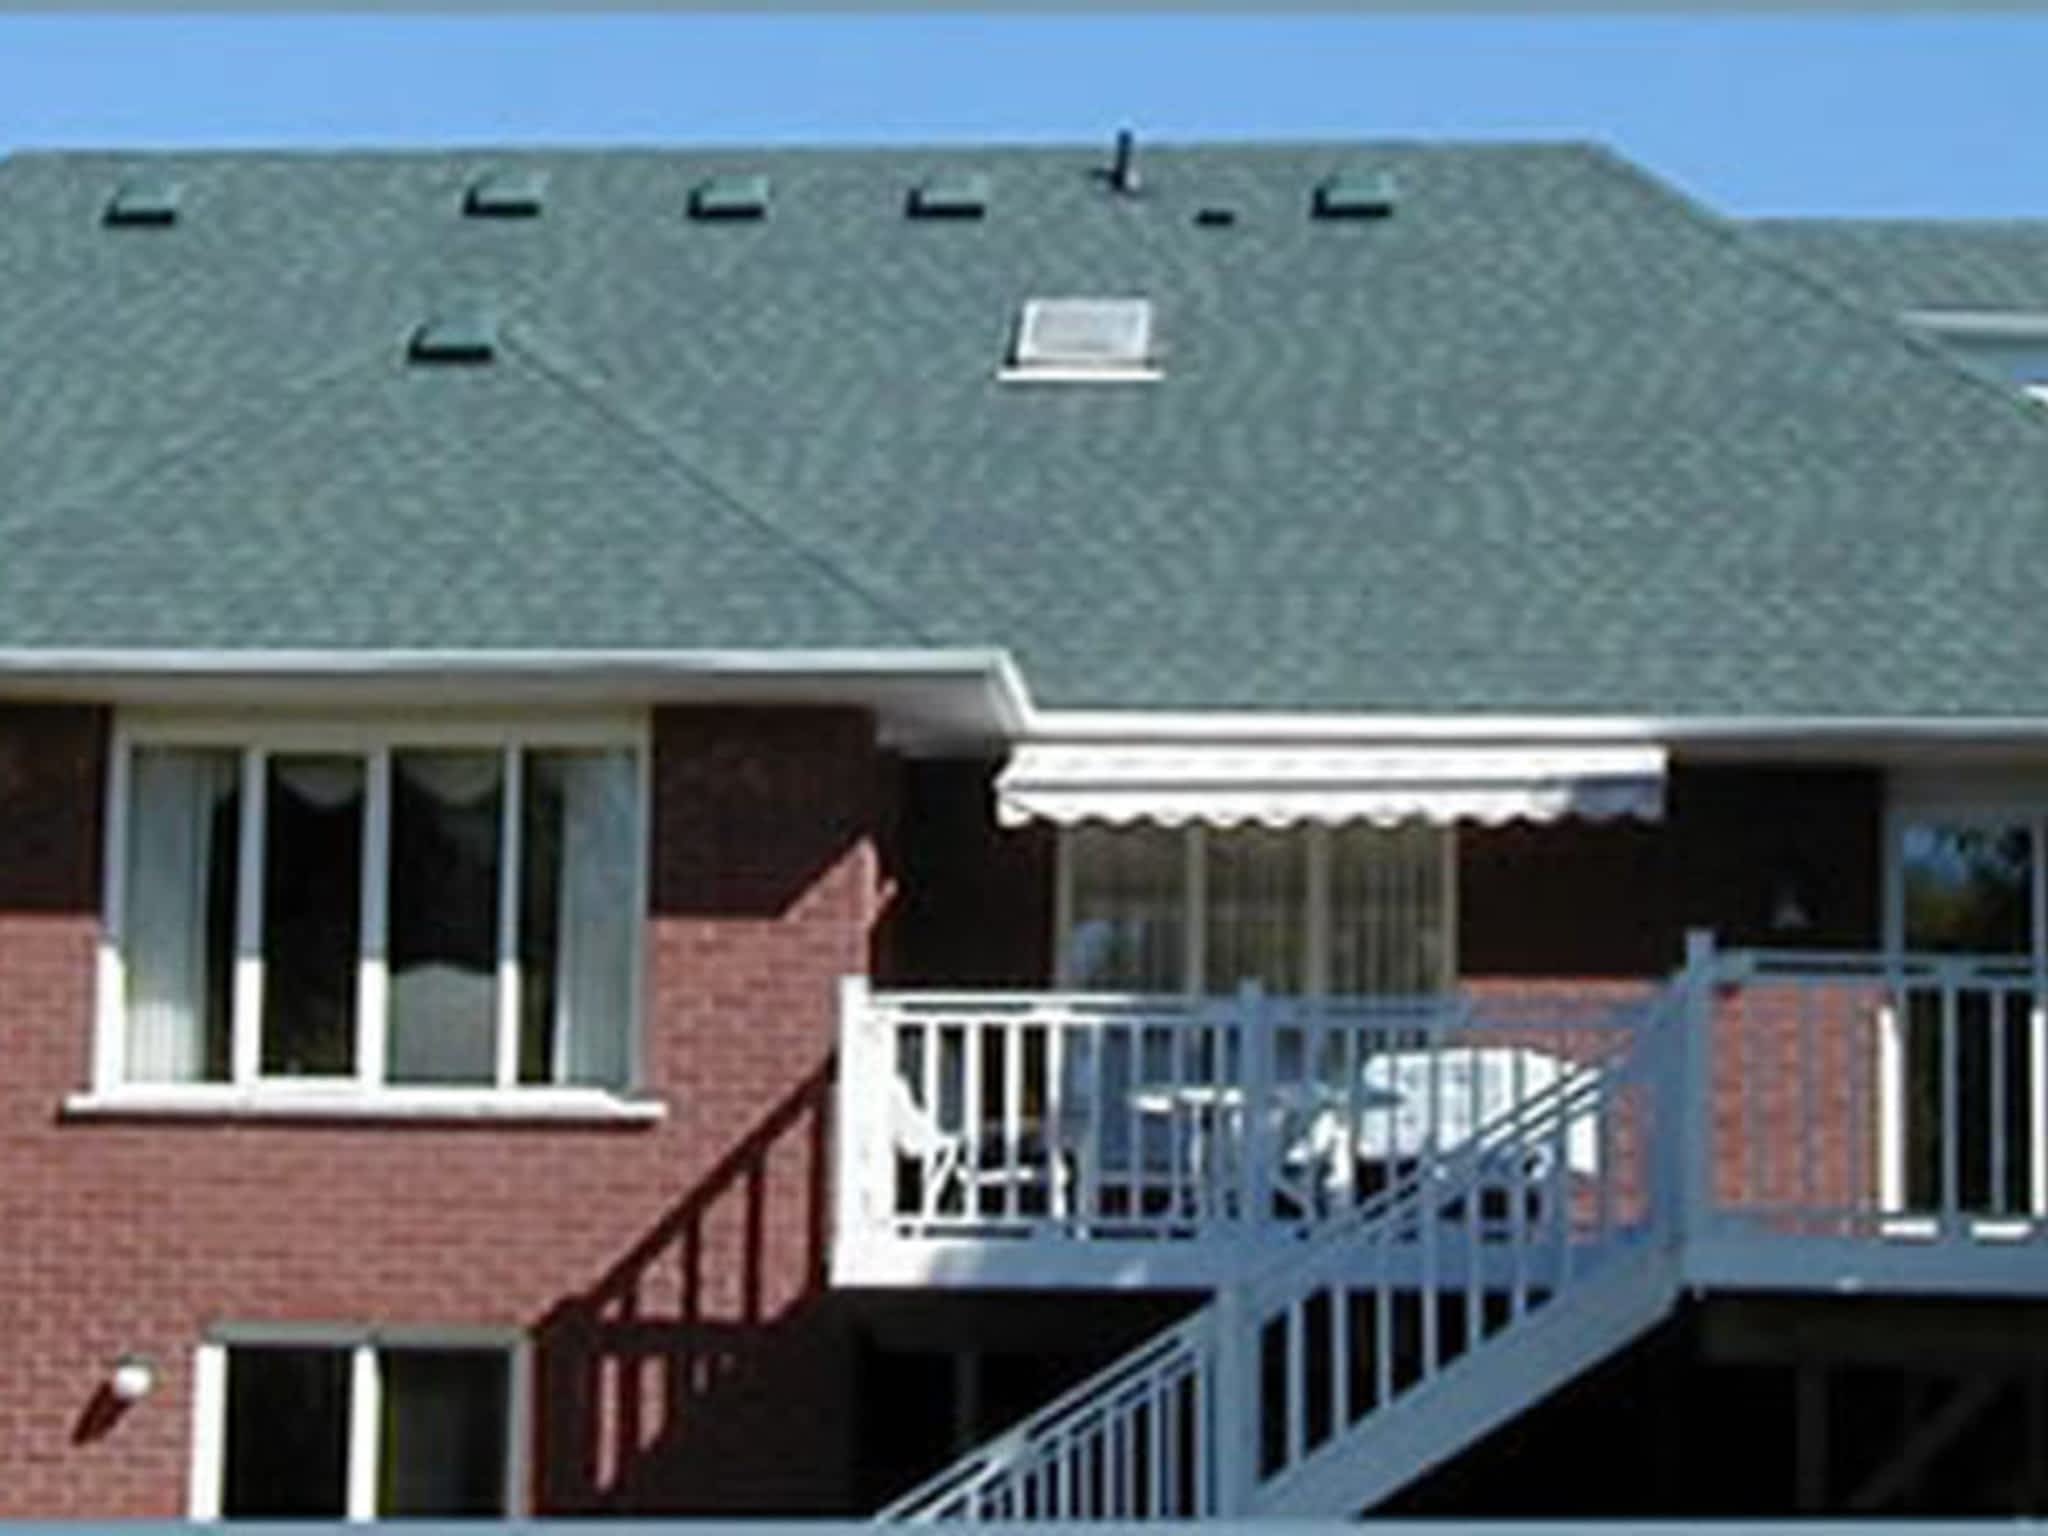 photo Dynamic Roofing & Exteriors Ltd